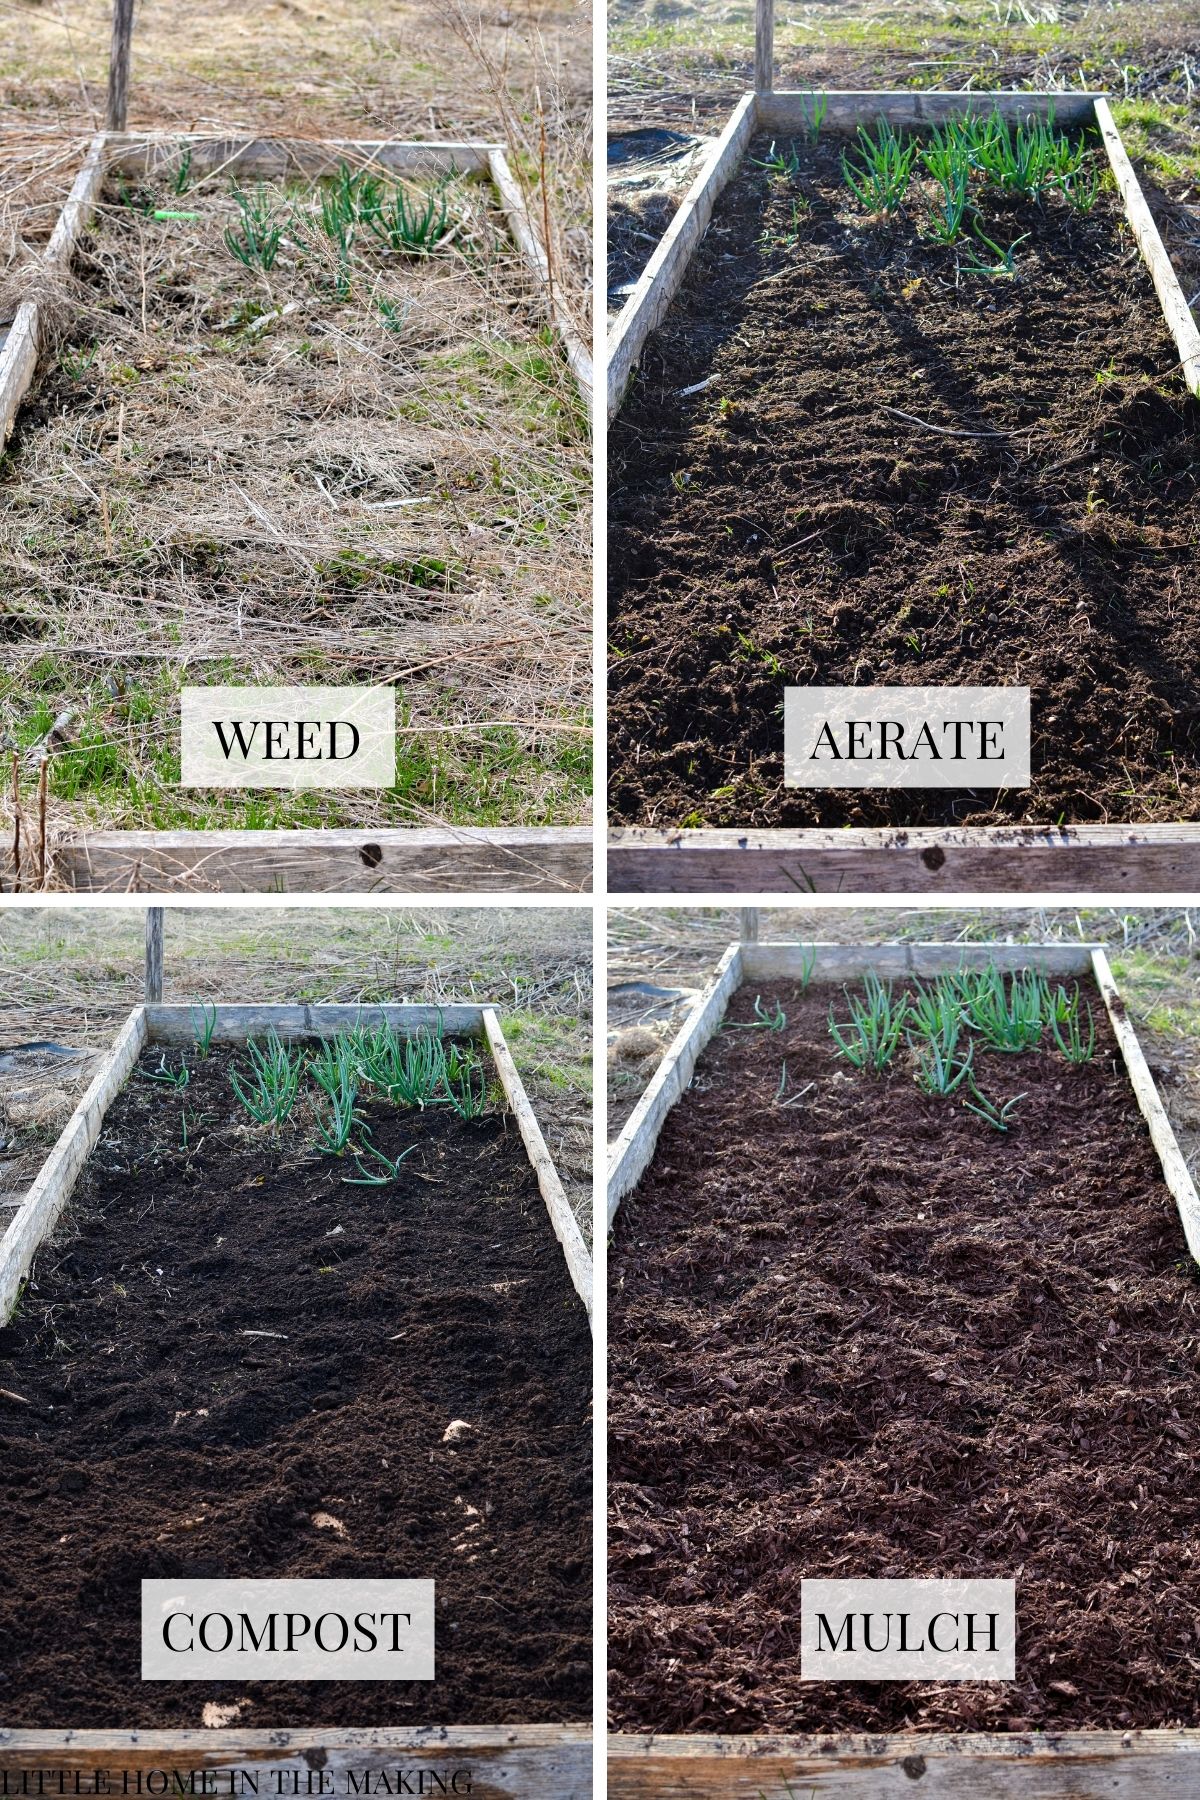 The four stages of replenishing a raised garden bed: weed, aerate, compost, and mulch.